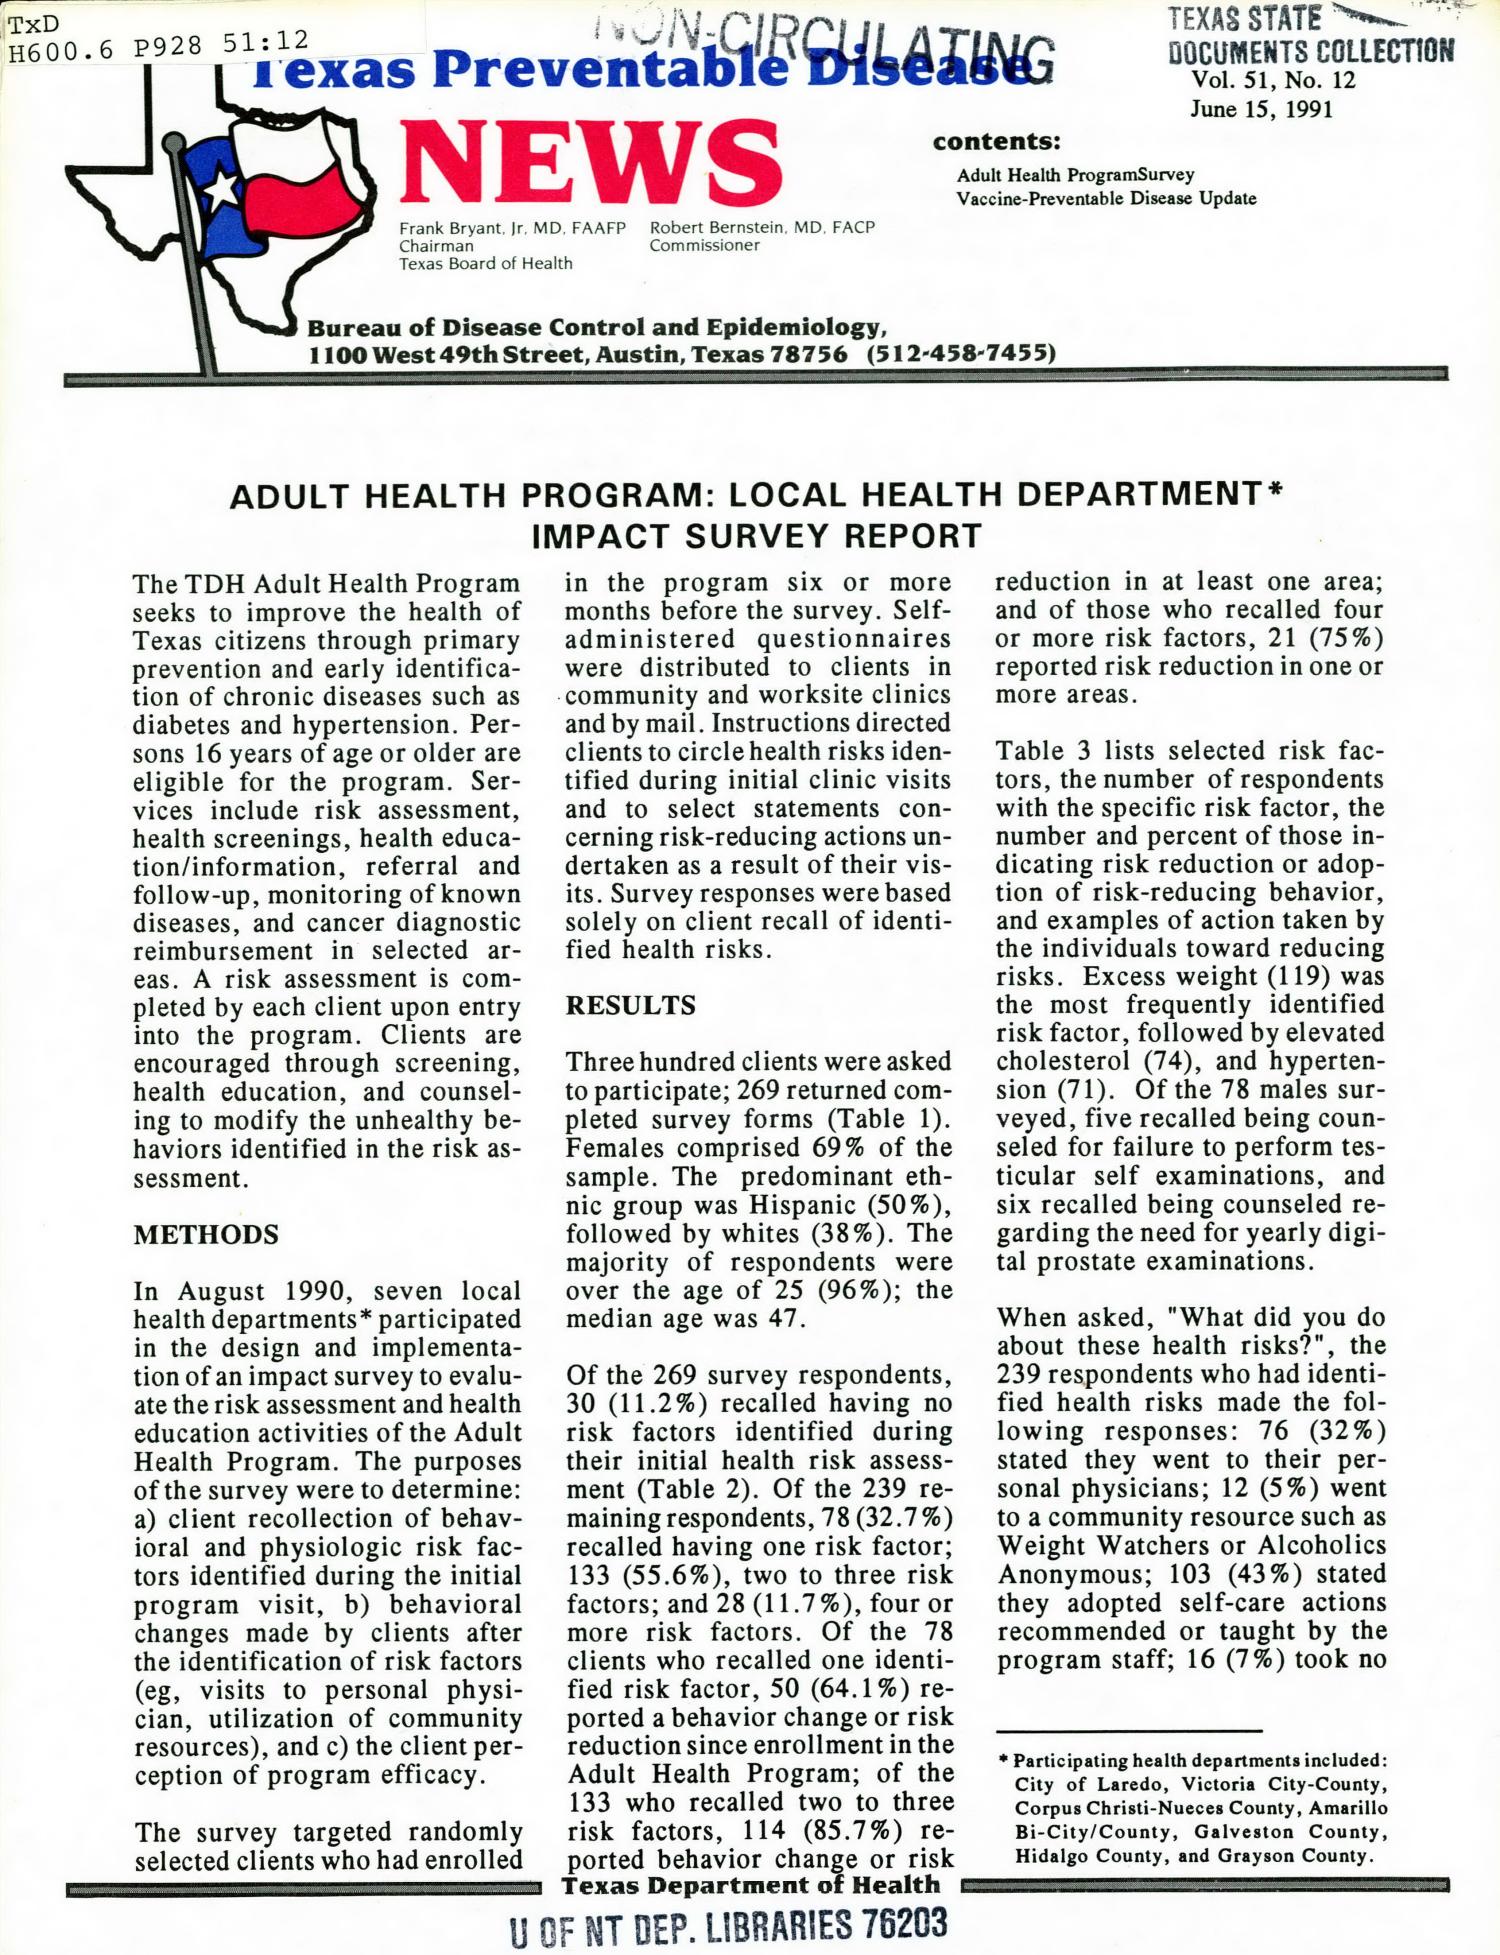 Texas Preventable Disease News, Volume 51, Number 12, June 15, 1991
                                                
                                                    Front Cover
                                                